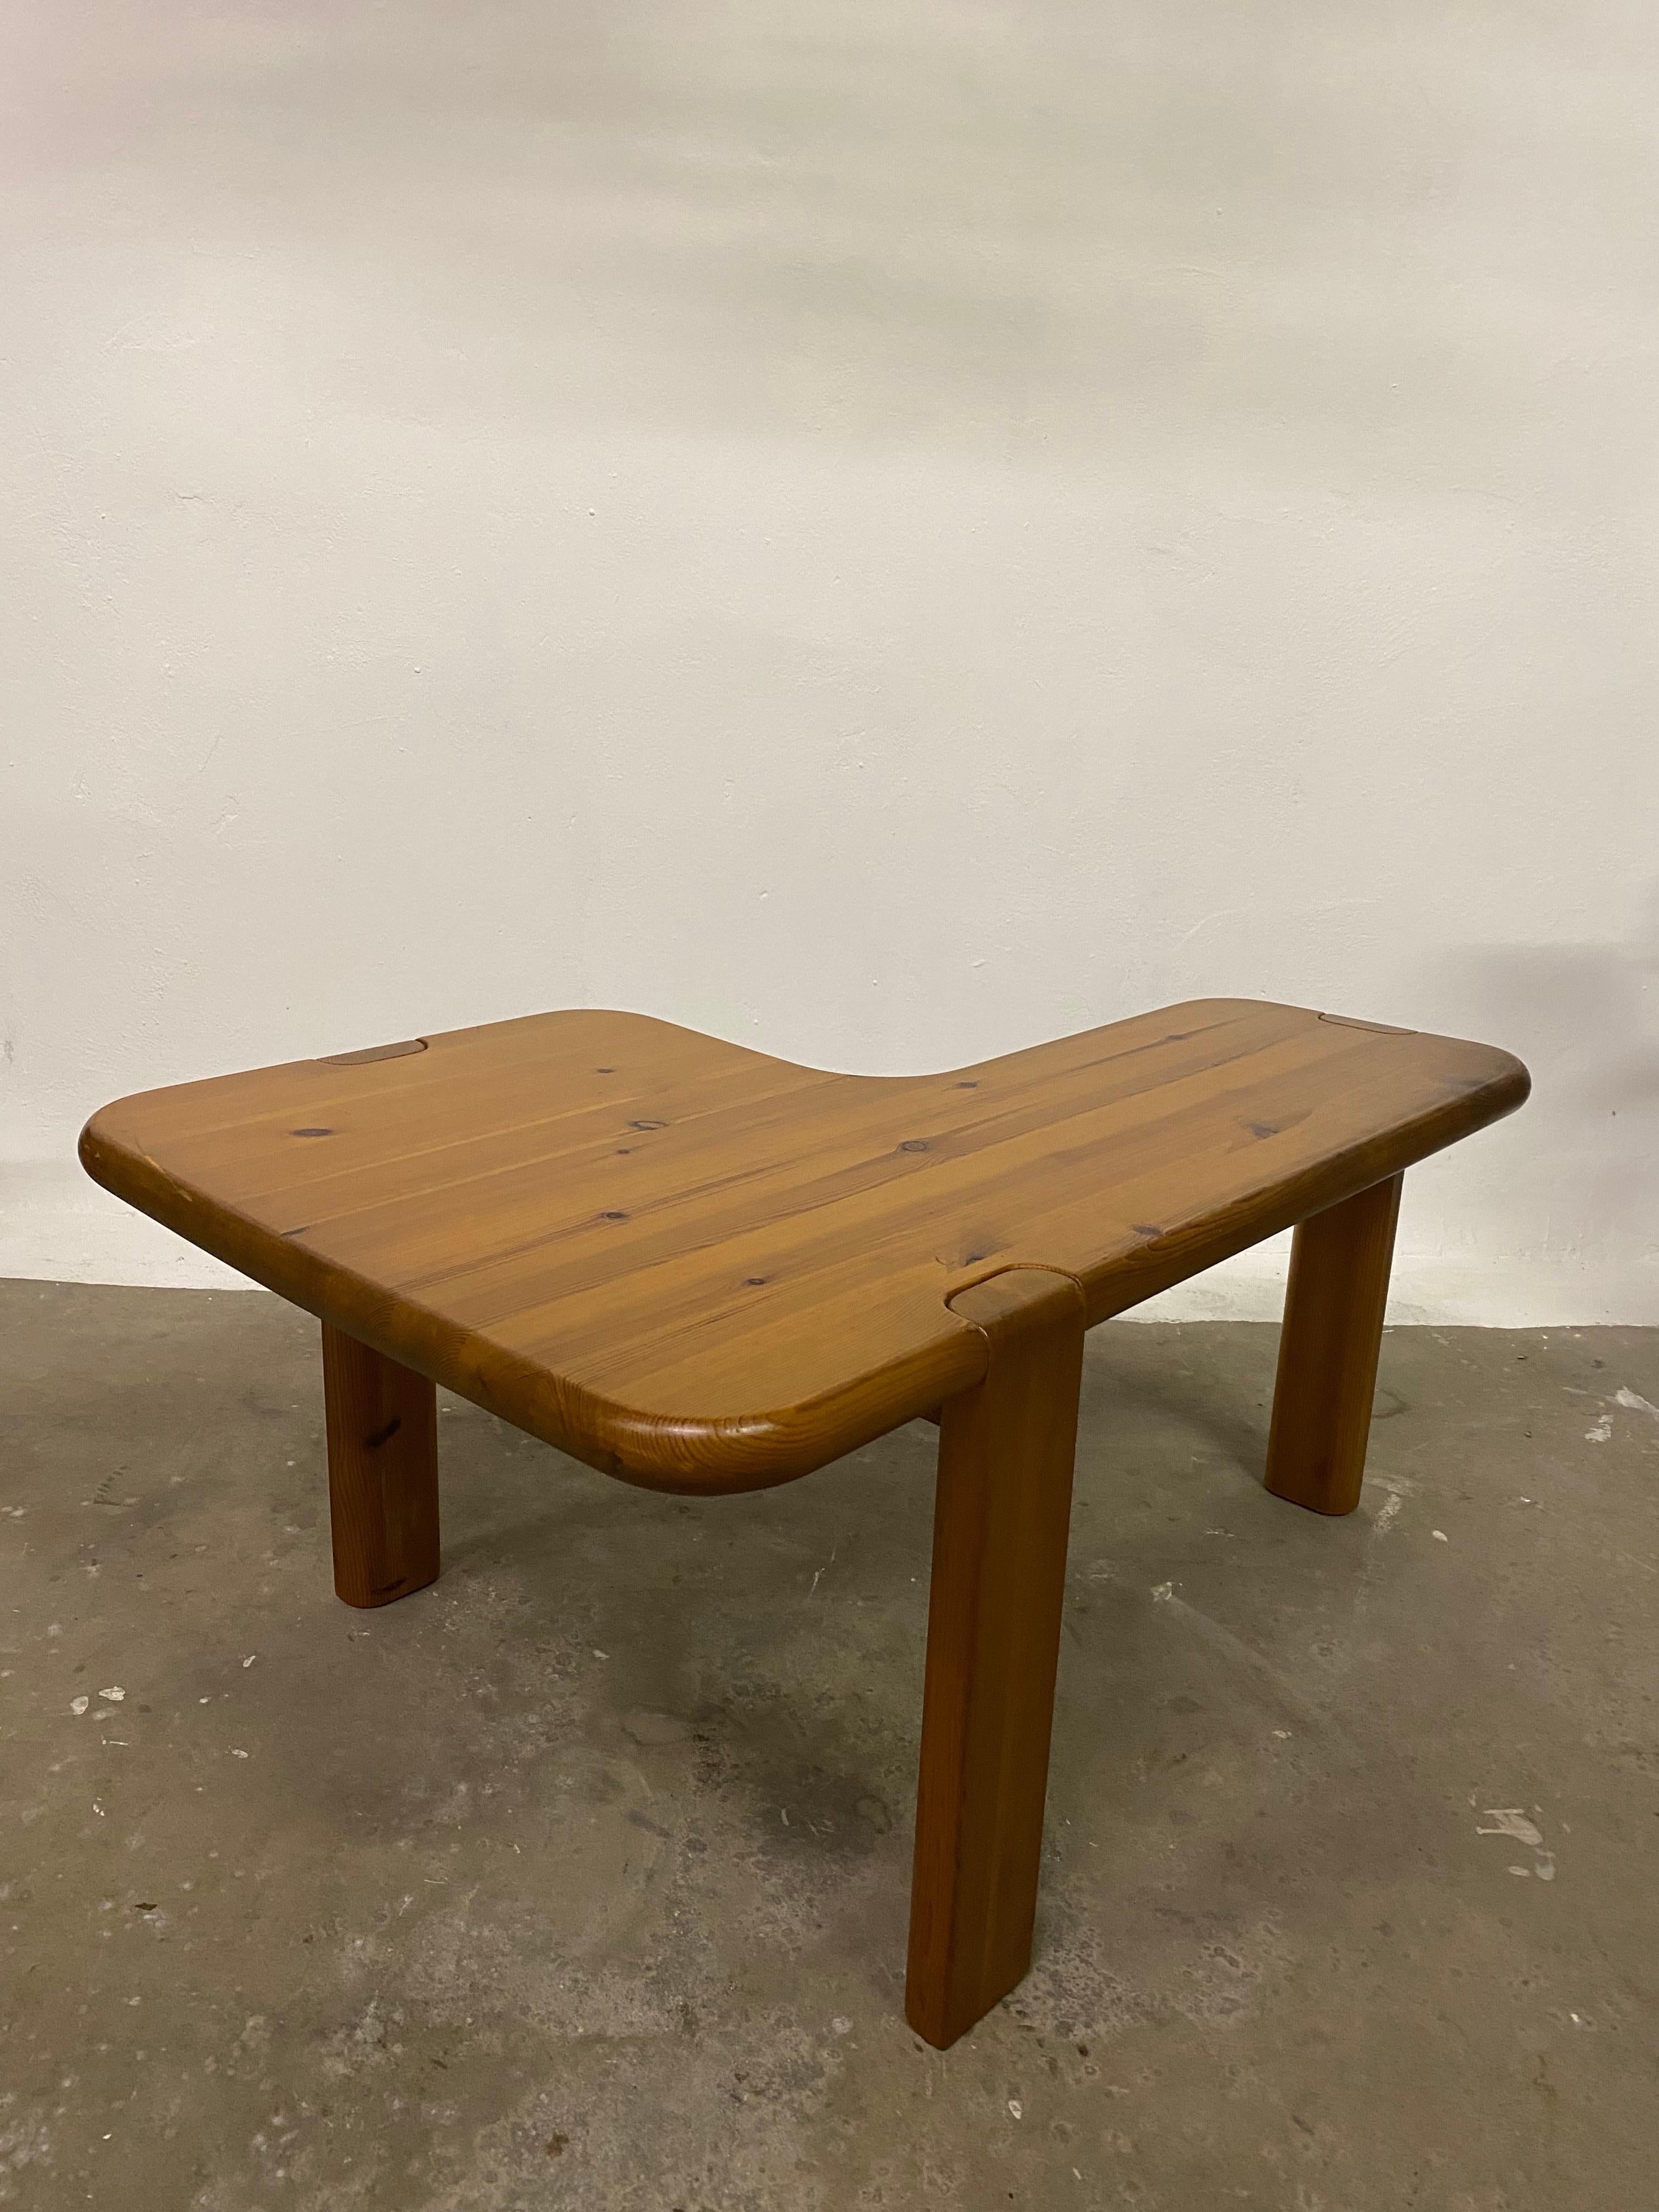 Set of 2 Midcentury Coffeetables by Aksel Kjersgaard for Odder Furniture 1970s For Sale 3